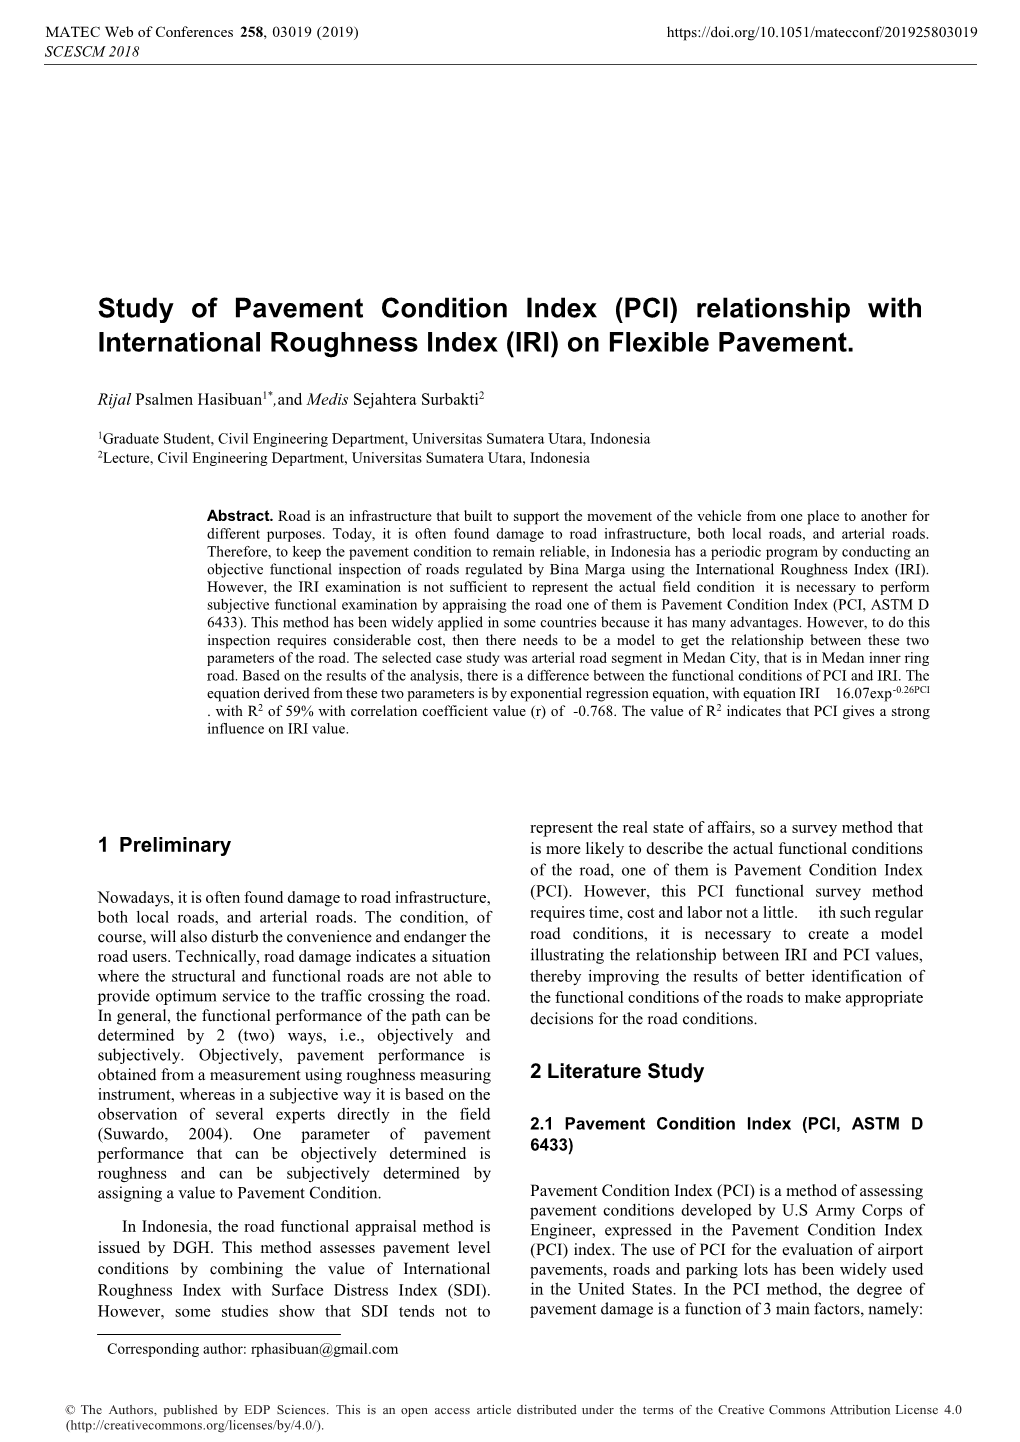 (PCI) Relationship with International Roughness Index (IRI) on Flexible Pavement